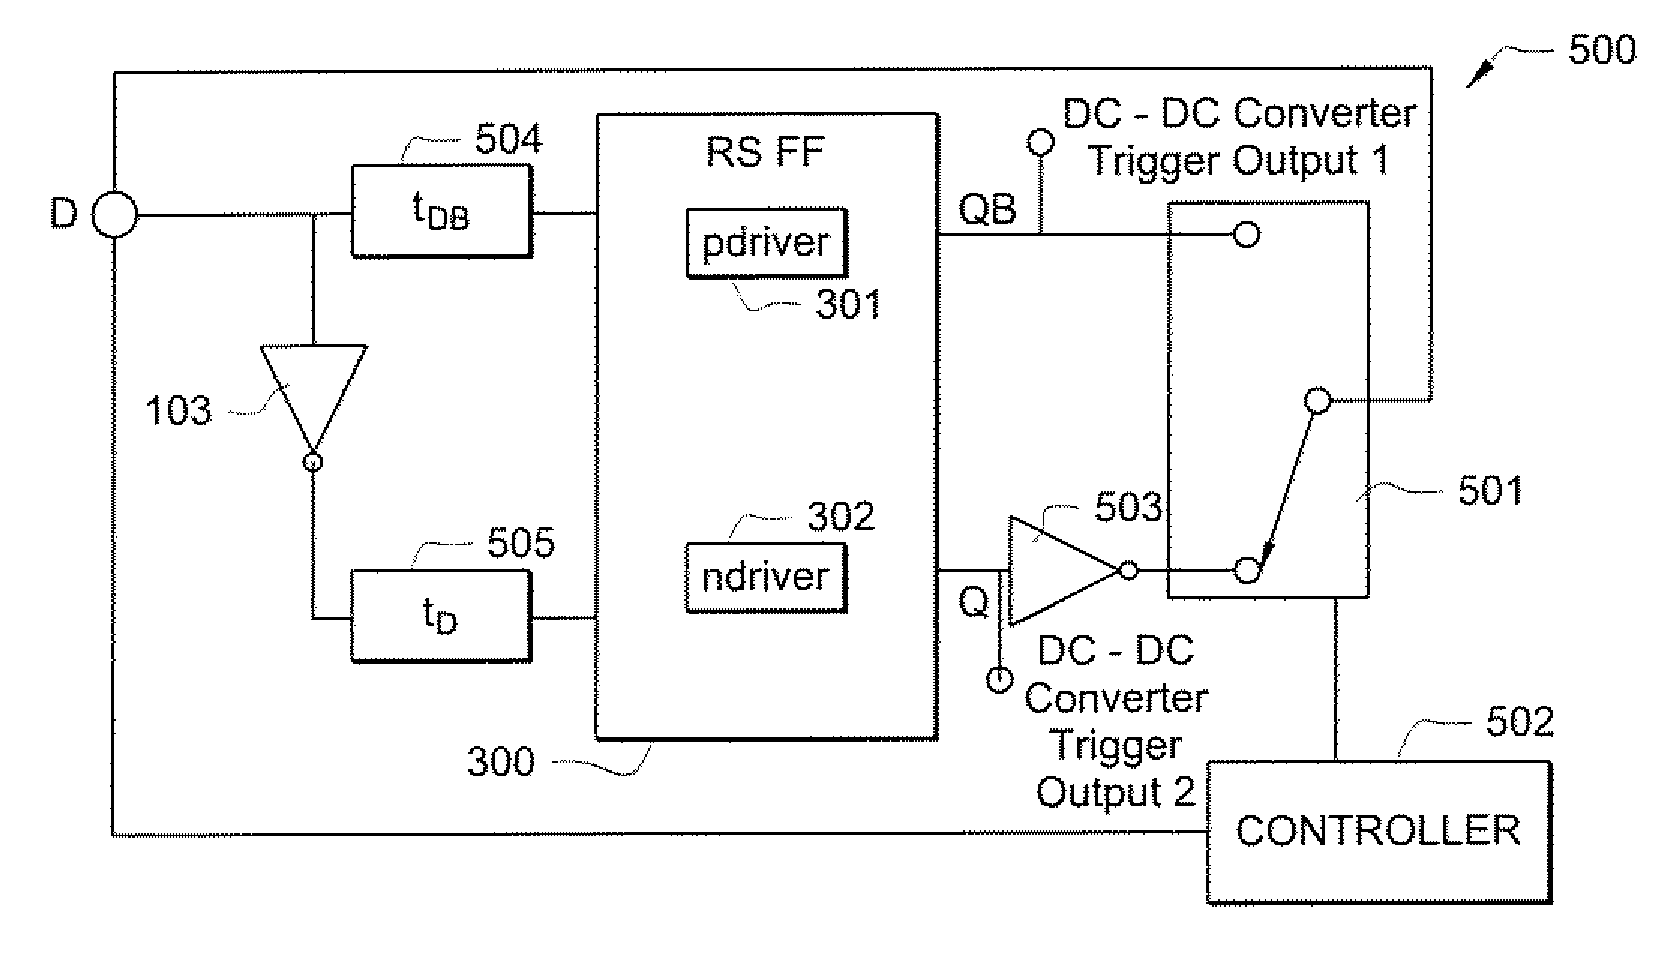 Low voltage synchronous oscillator for dc-dc converter